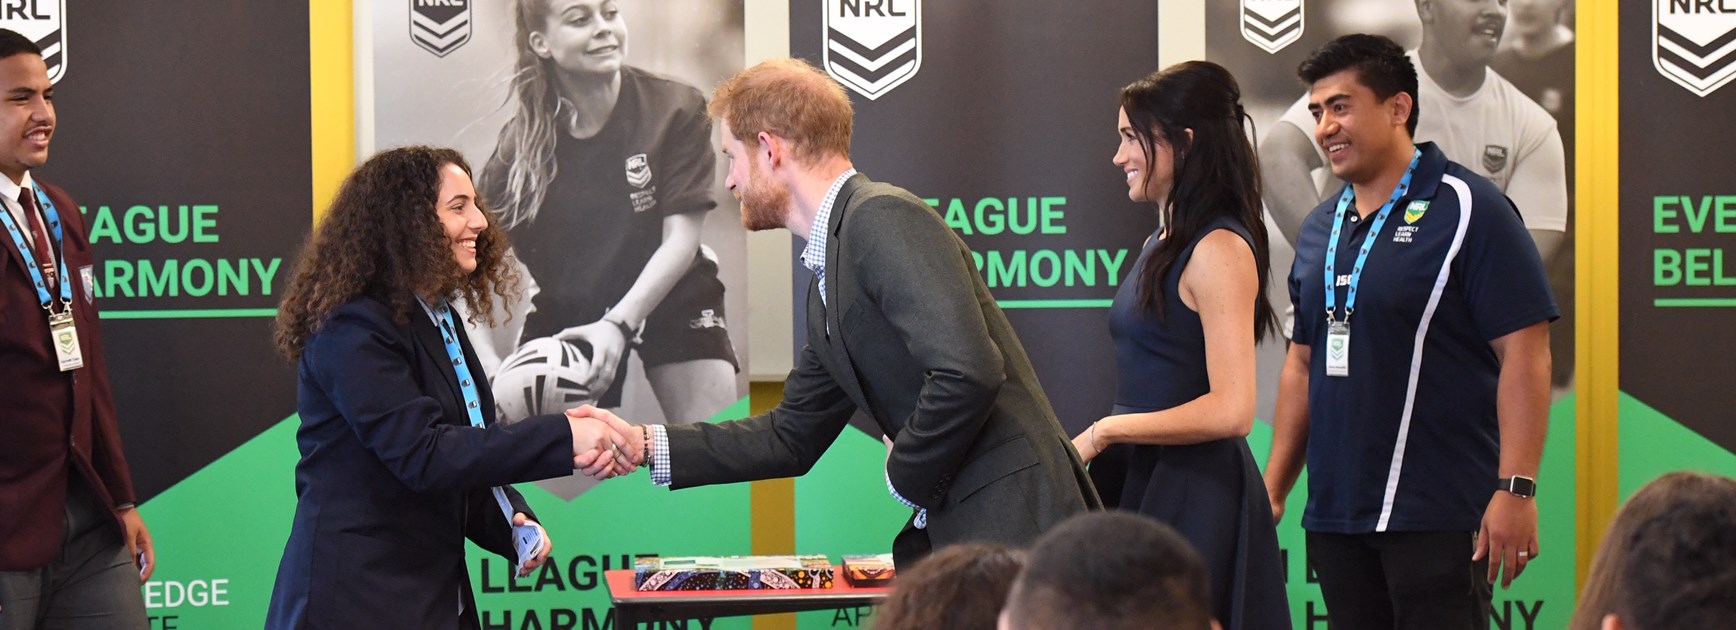 Prince Harry and Meghan Markle took part in the National Rugby League's 'In League in Harmony' program. 